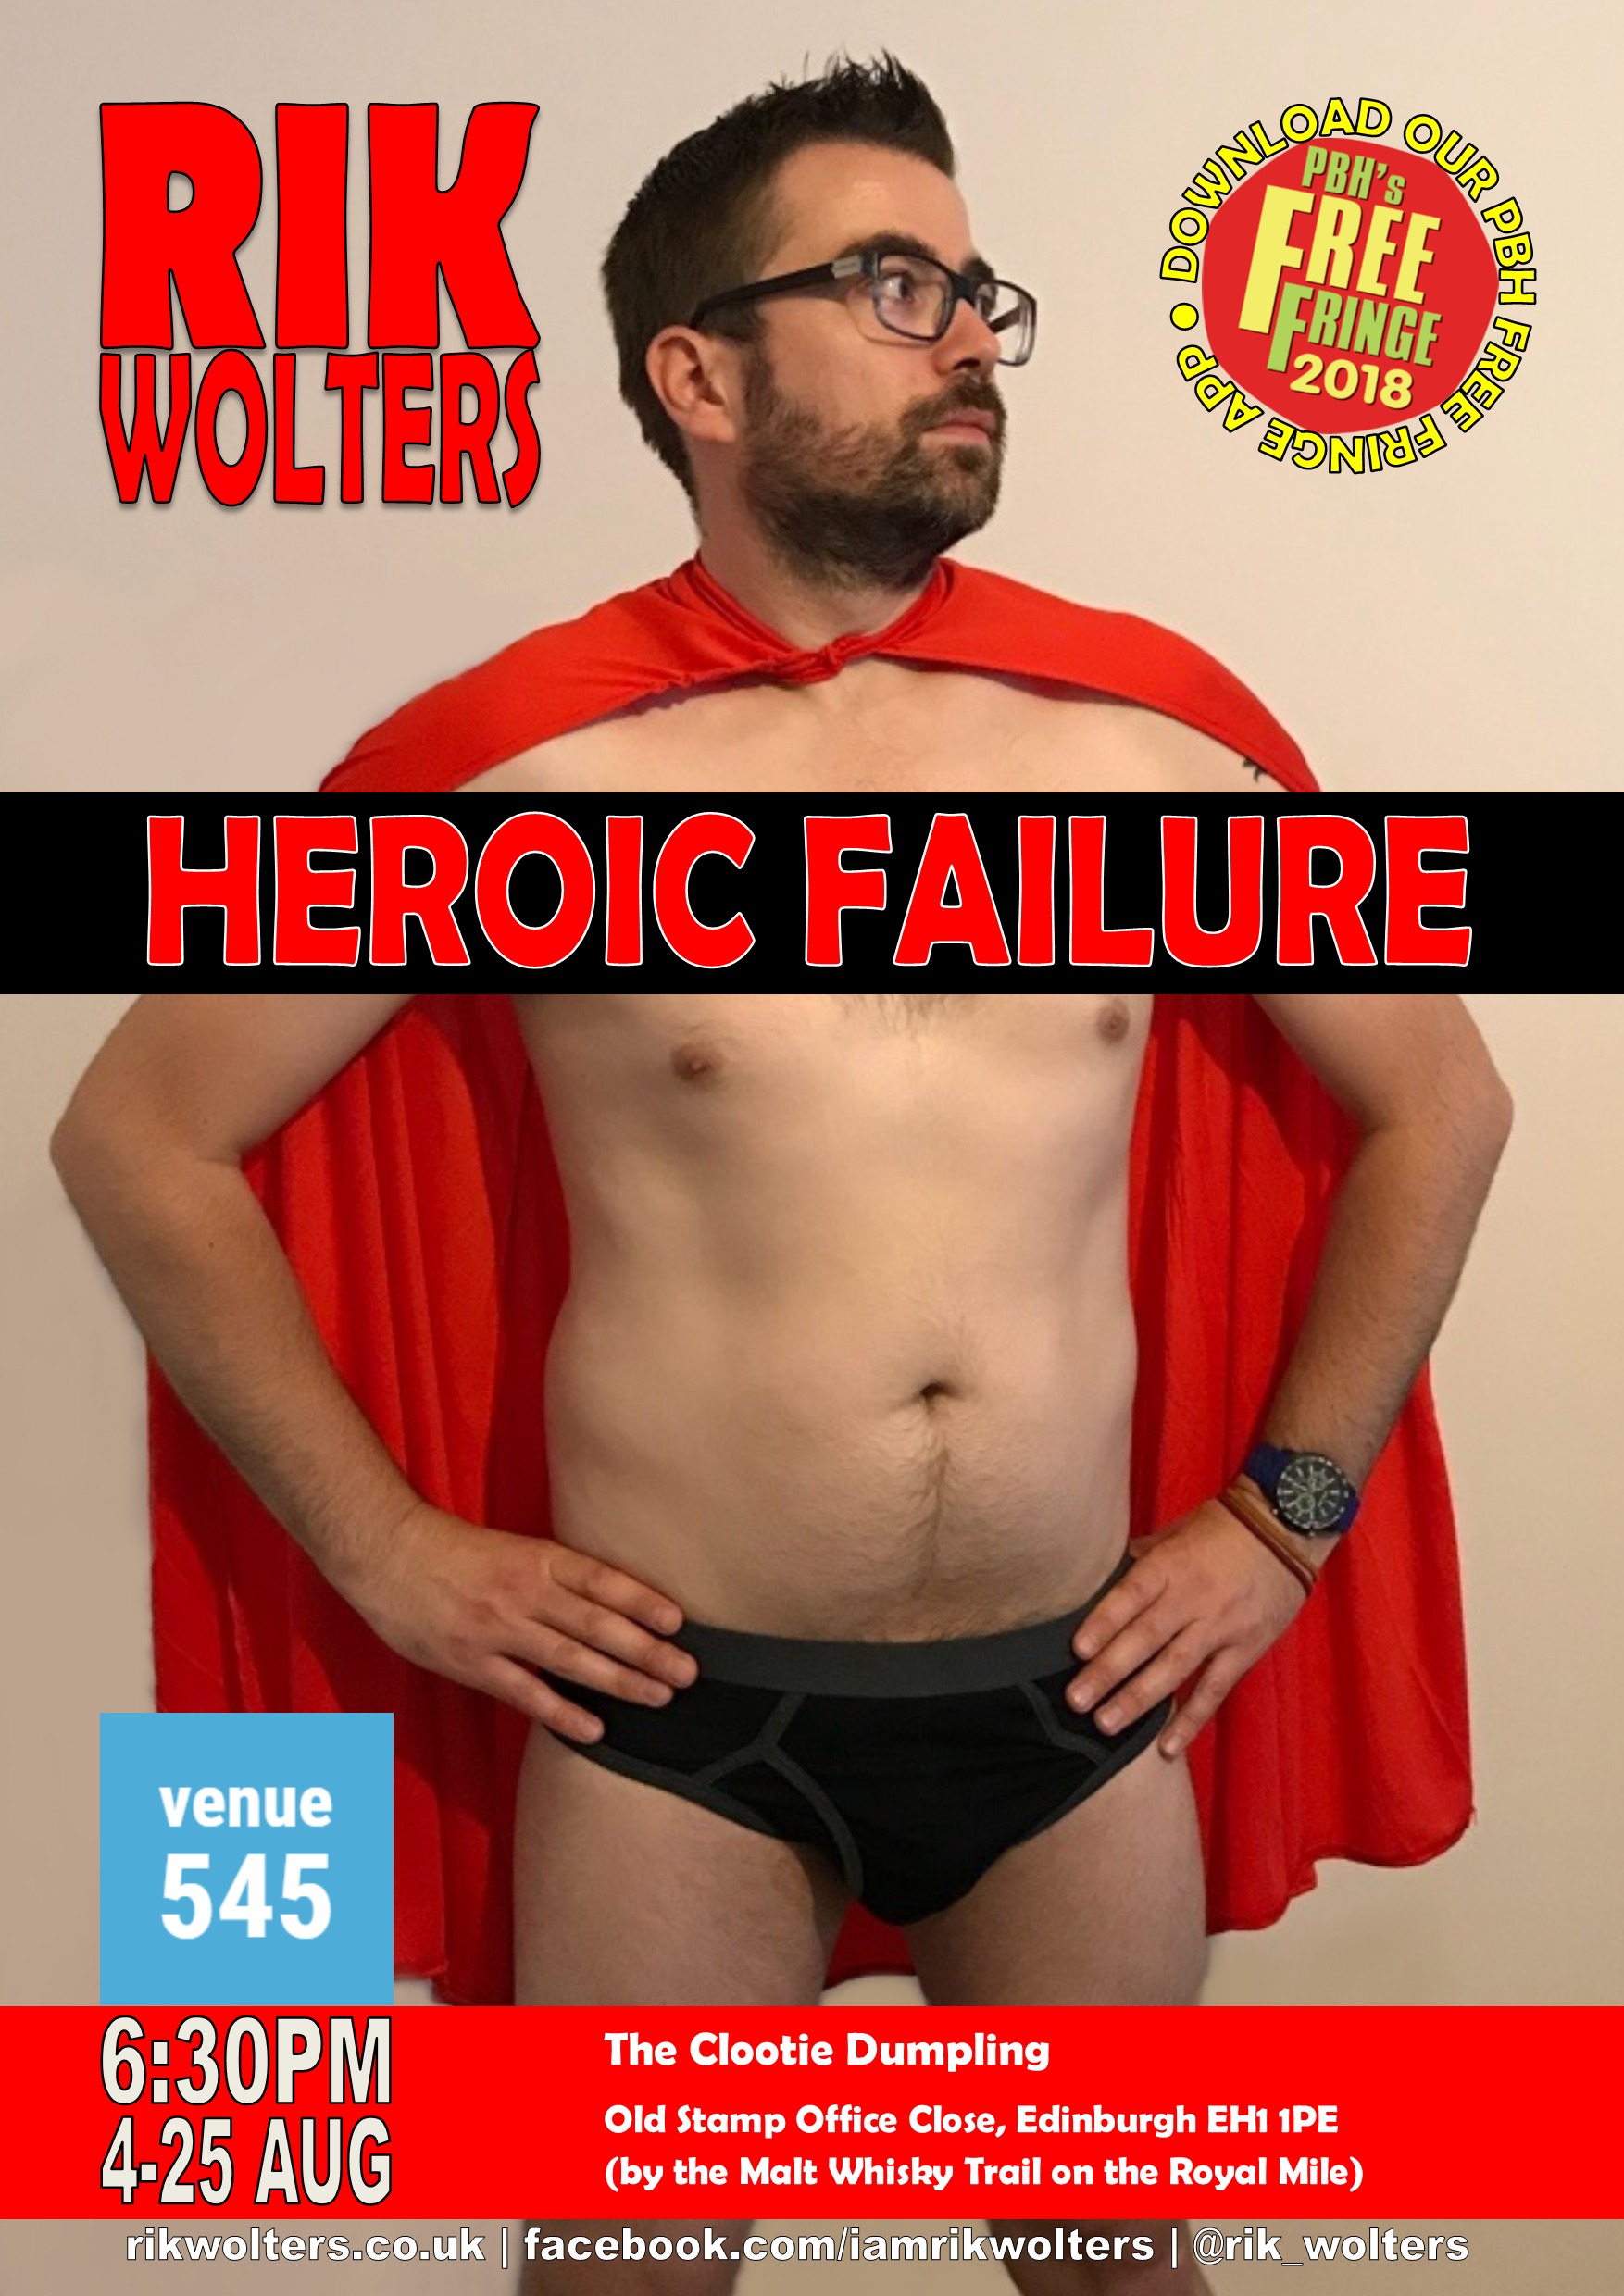 The poster for Rik Wolters - Heroic Failure